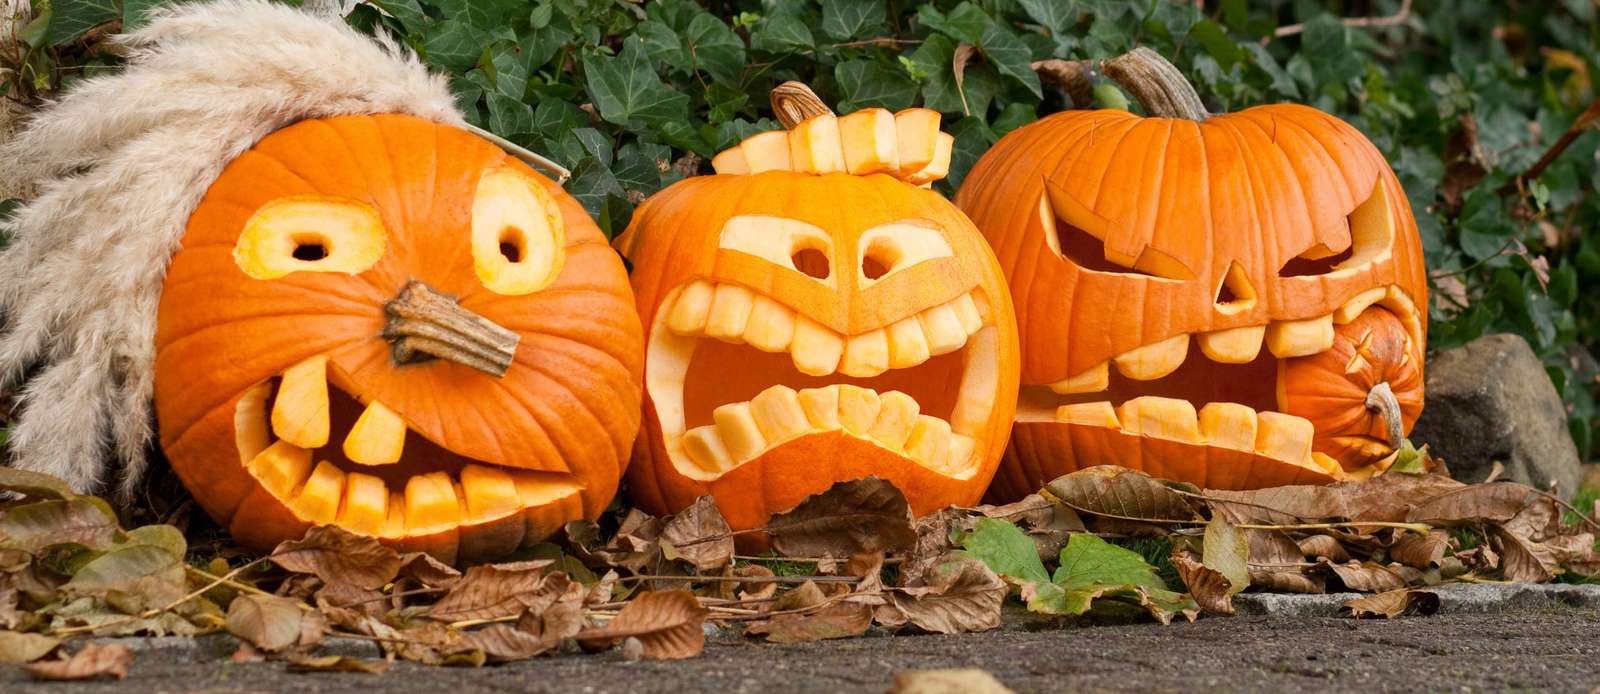 Carved pumpkins for Halloween jigsaw puzzle online